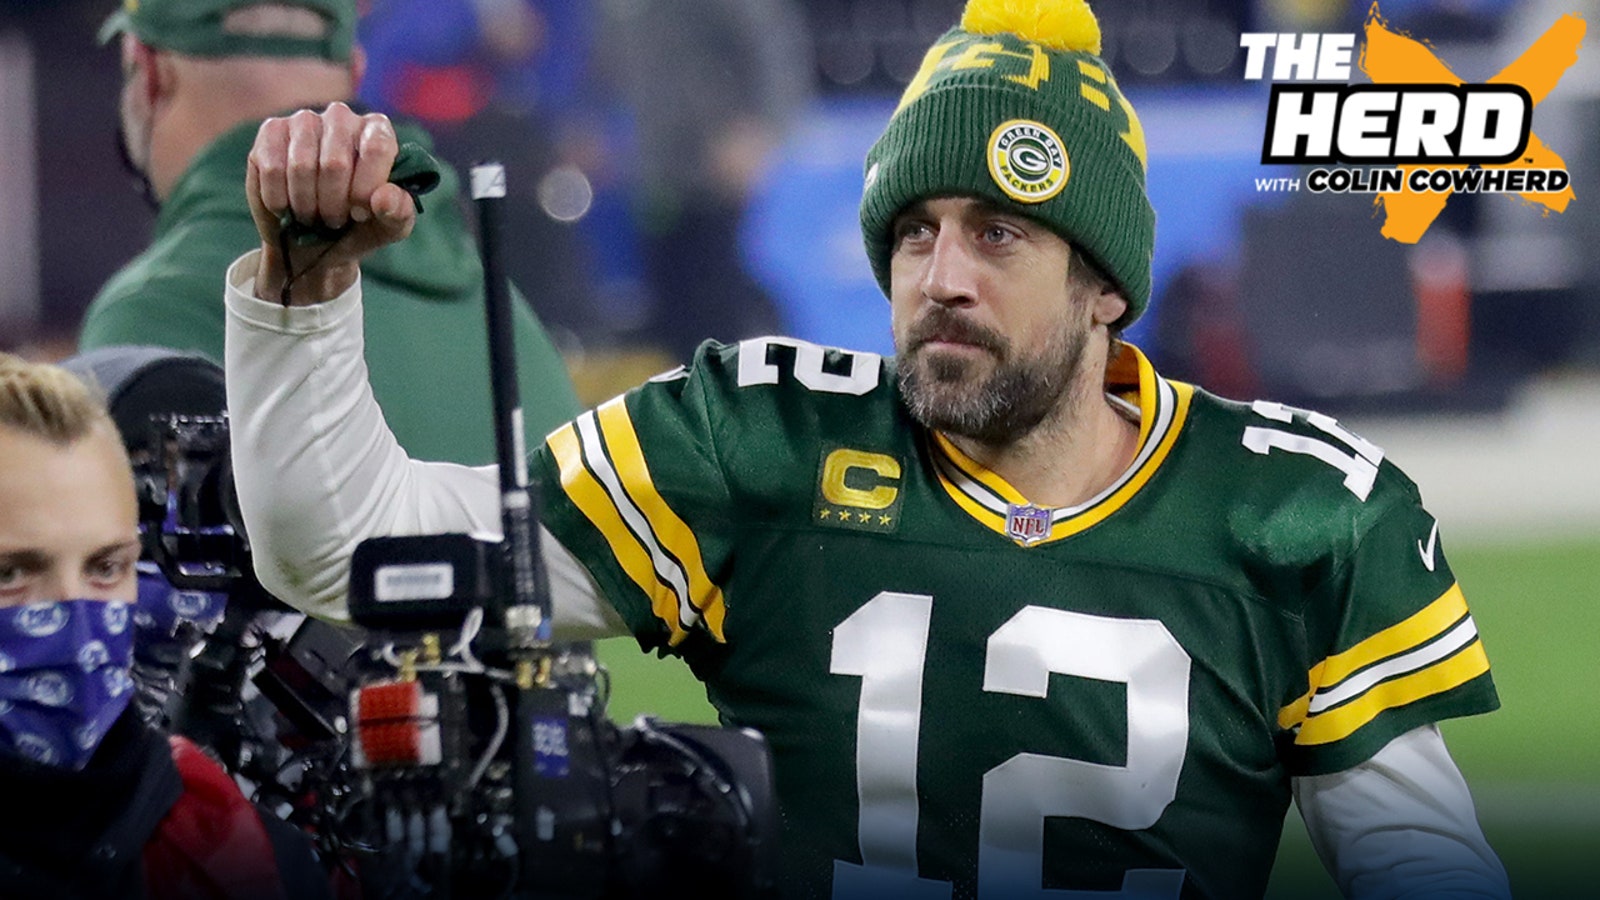 Colin Cowherd breaks down what we can take from Aaron Rodgers showing up for Packers' training camp I THE HERD